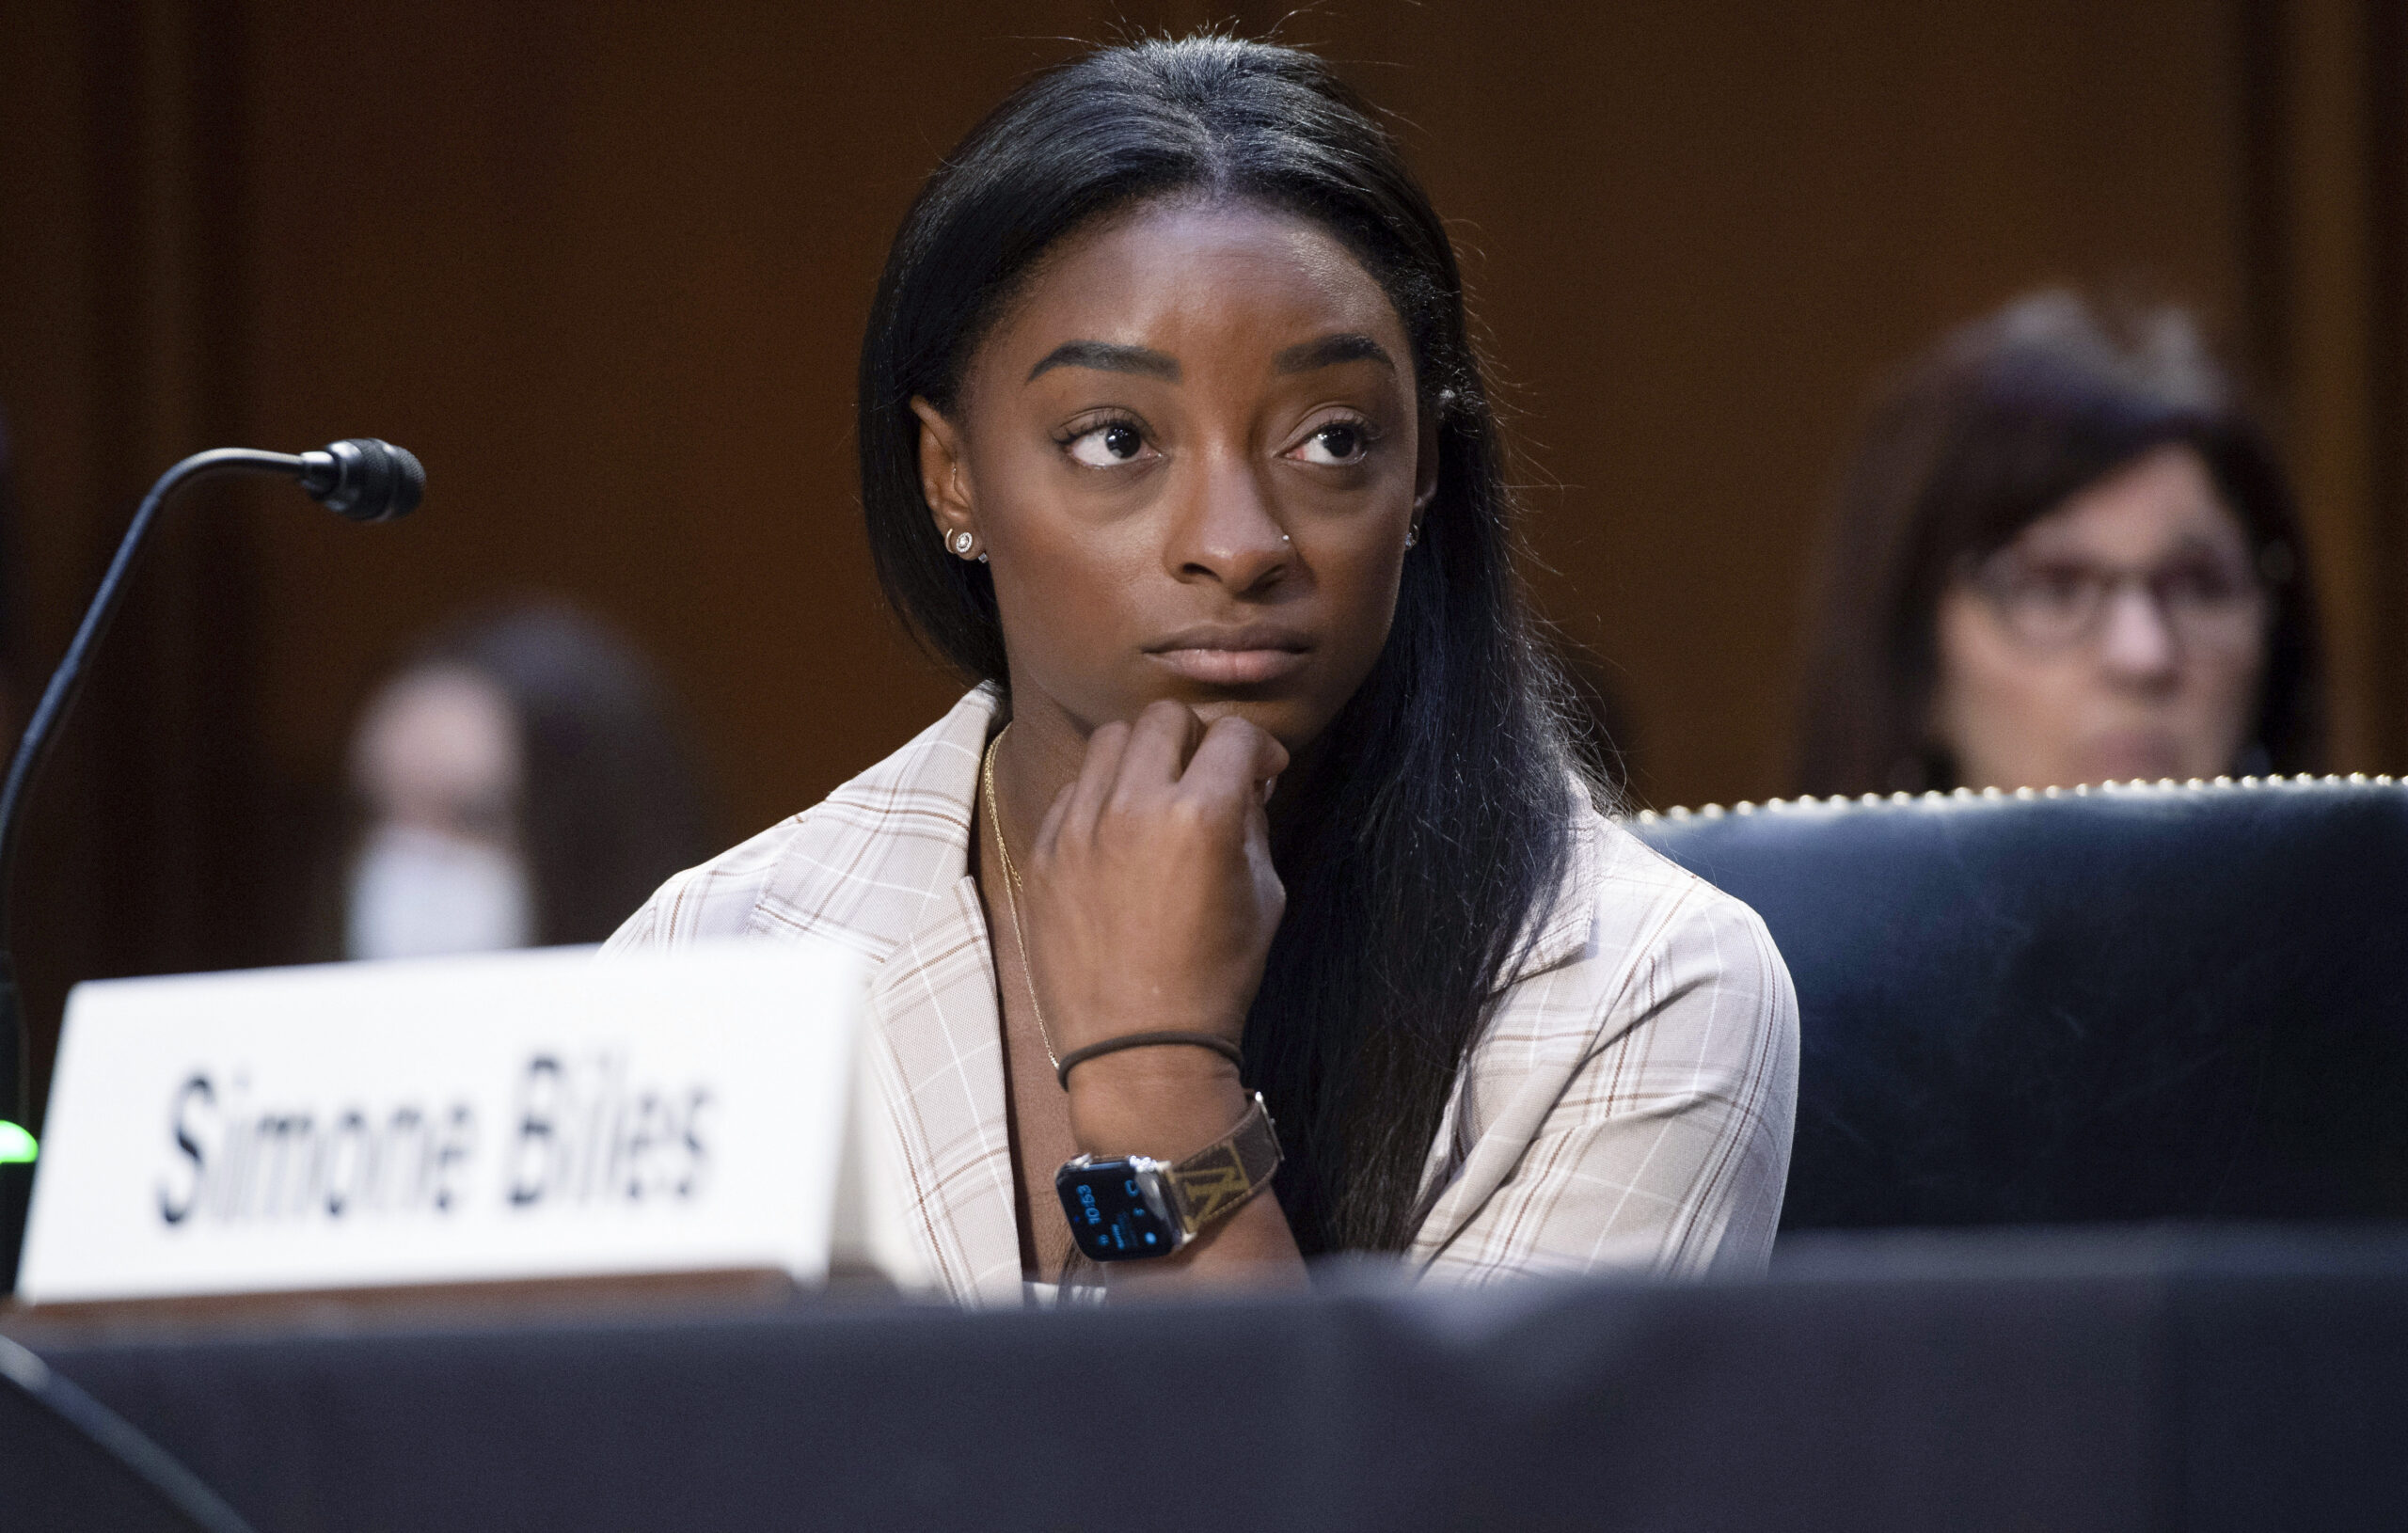 United States Olympic gymnast Simone Biles testifies during a Senate Judiciary hearing about the Inspector General's report on the FBI's handling of the Larry Nassar investigation on Capitol Hill, Wednesday, Sept. 15, 2021, in Washington. Nassar was charged in 2016 with federal child pornography offenses and sexual abuse charges in Michigan. He is now serving decades in prison after hundreds of girls and women said he sexually abused them under the guise of medical treatment when he worked for Michigan State and Indiana-based USA Gymnastics, which trains Olympians. (Saul Loeb/Pool via AP)